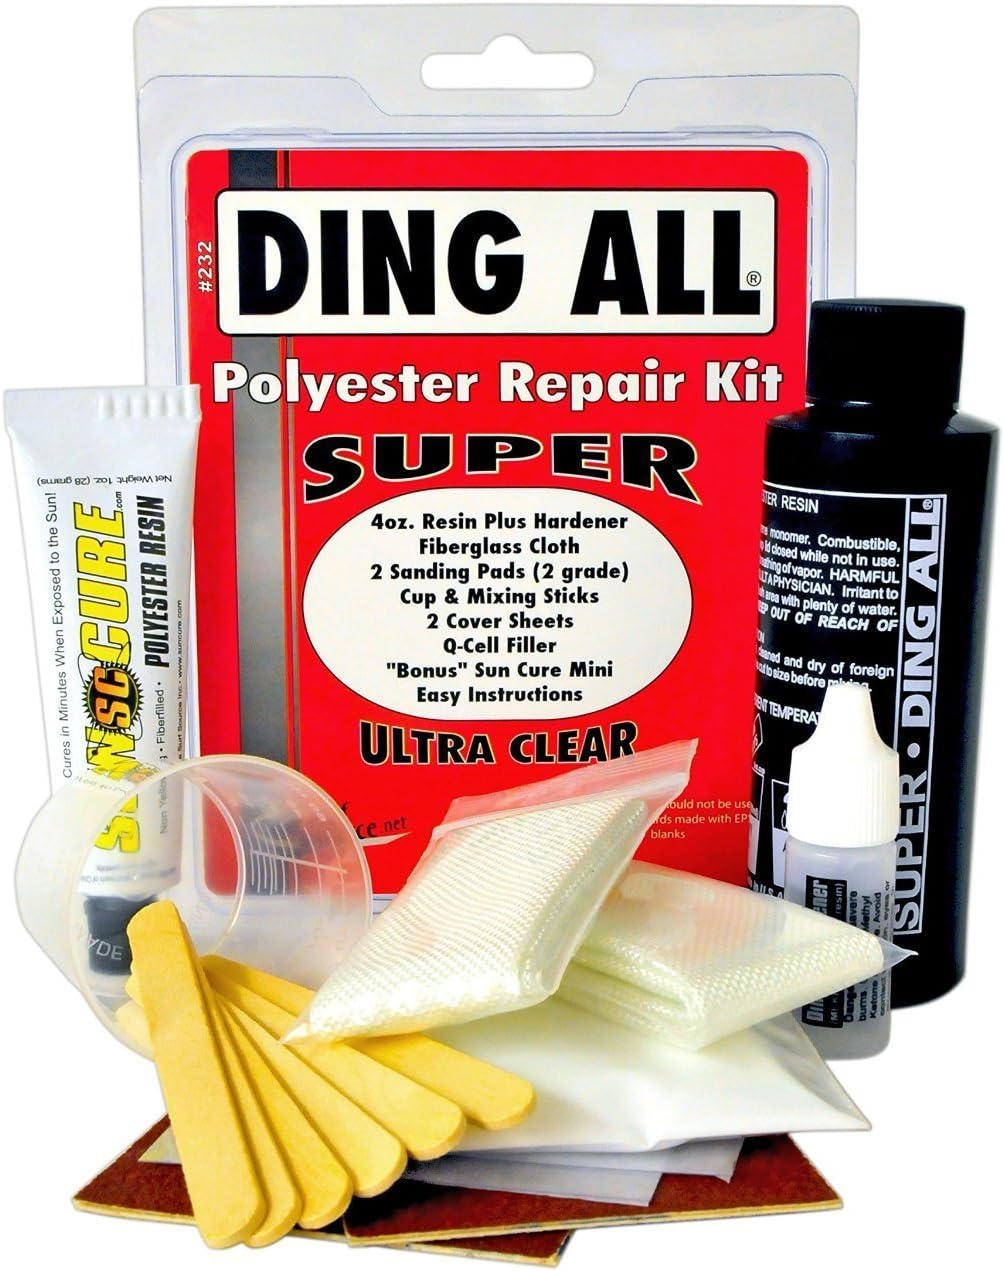 Ding All 4 Oz All SUPER Polyester Repair Kit